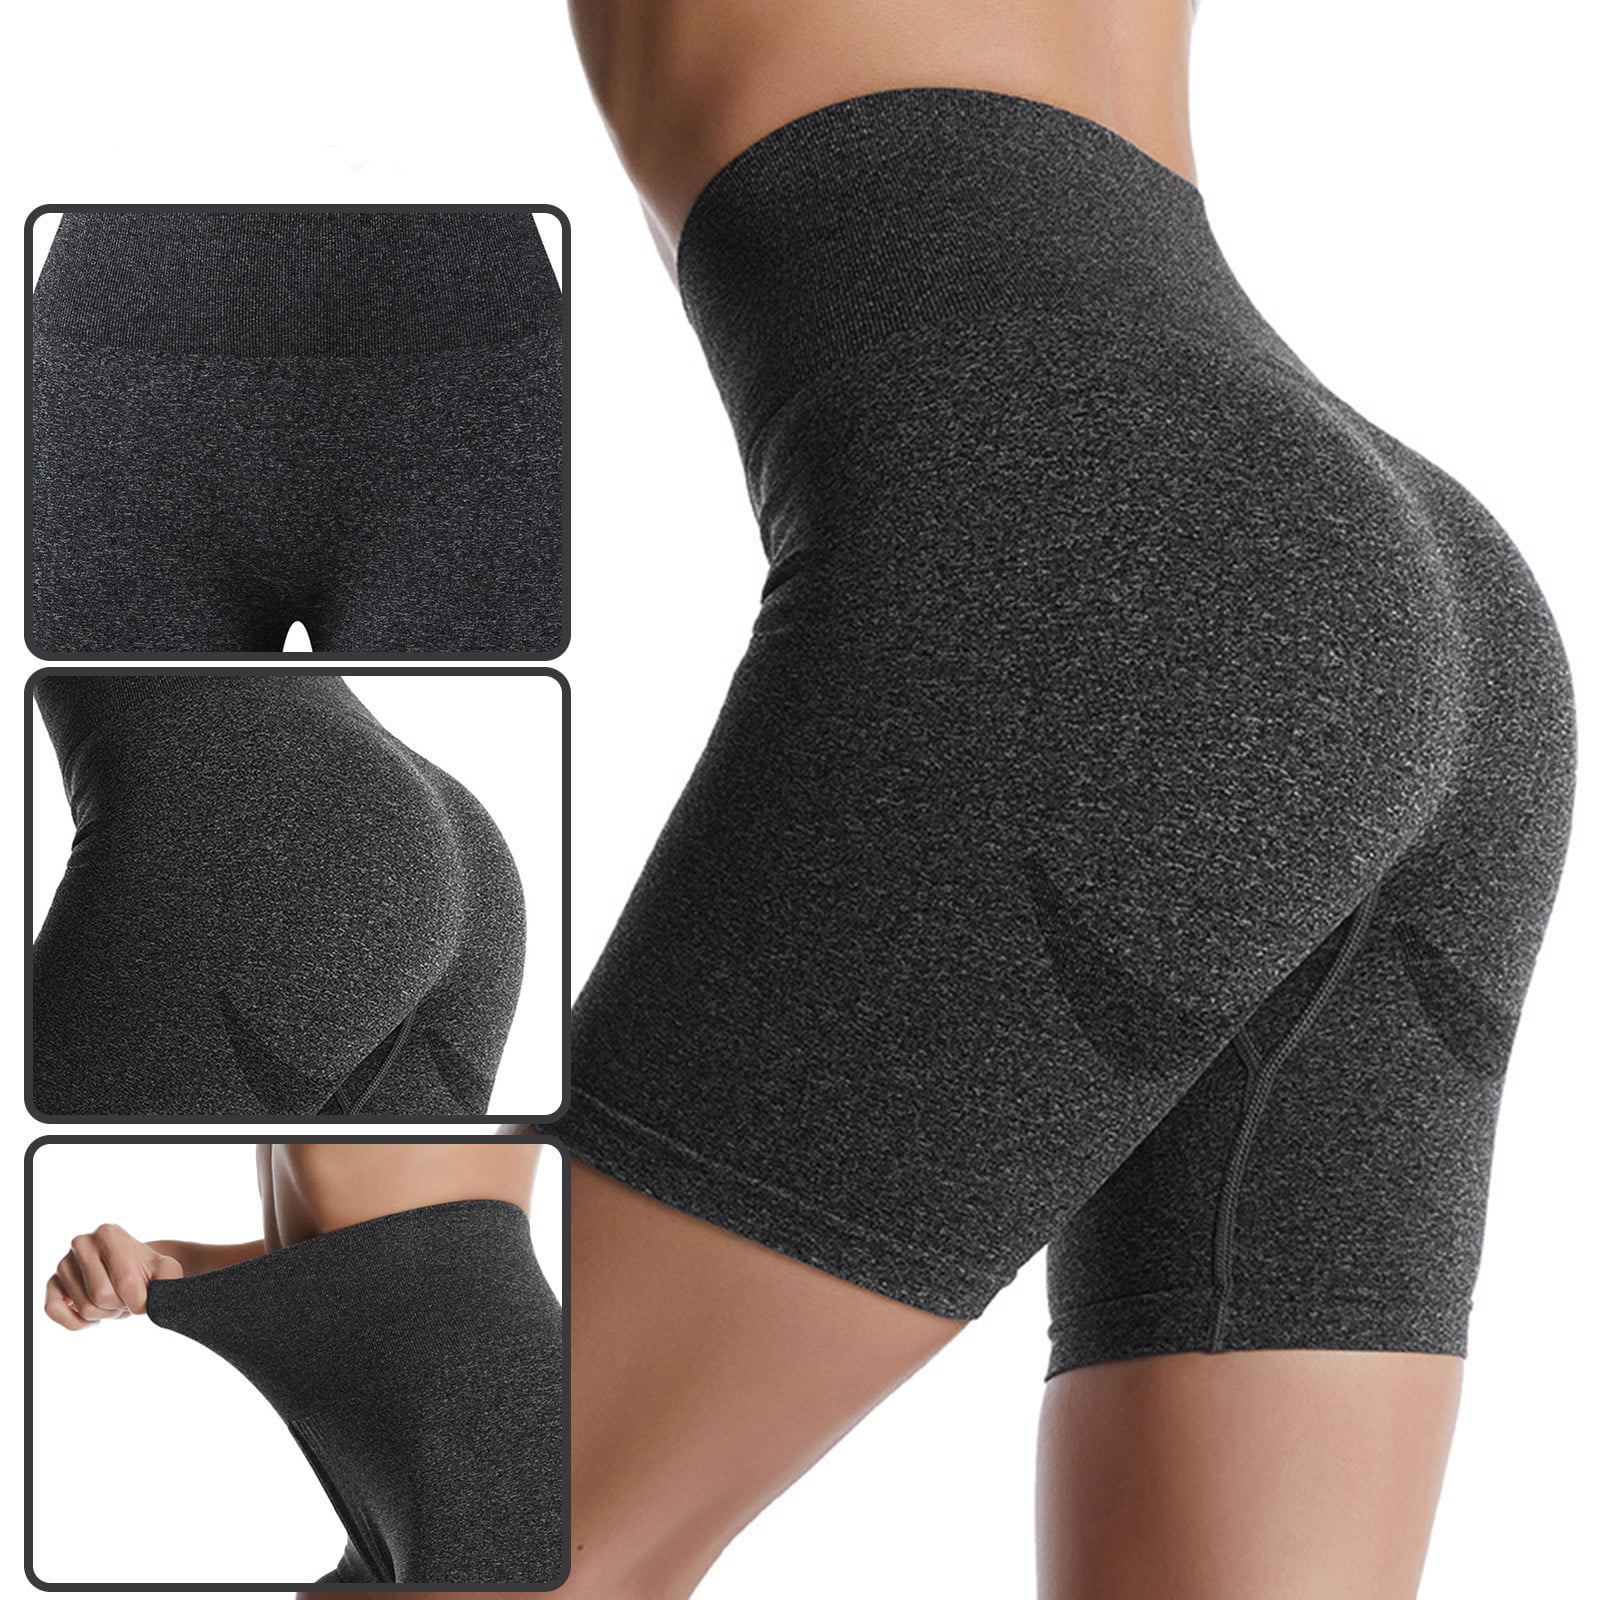  HELMDY High Waisted Leggings for Women Workout Tummy Control  Yoga Pants with Pockets Gray Buttery Soft Flattering Squat Proof Gym  Leggings : Clothing, Shoes & Jewelry